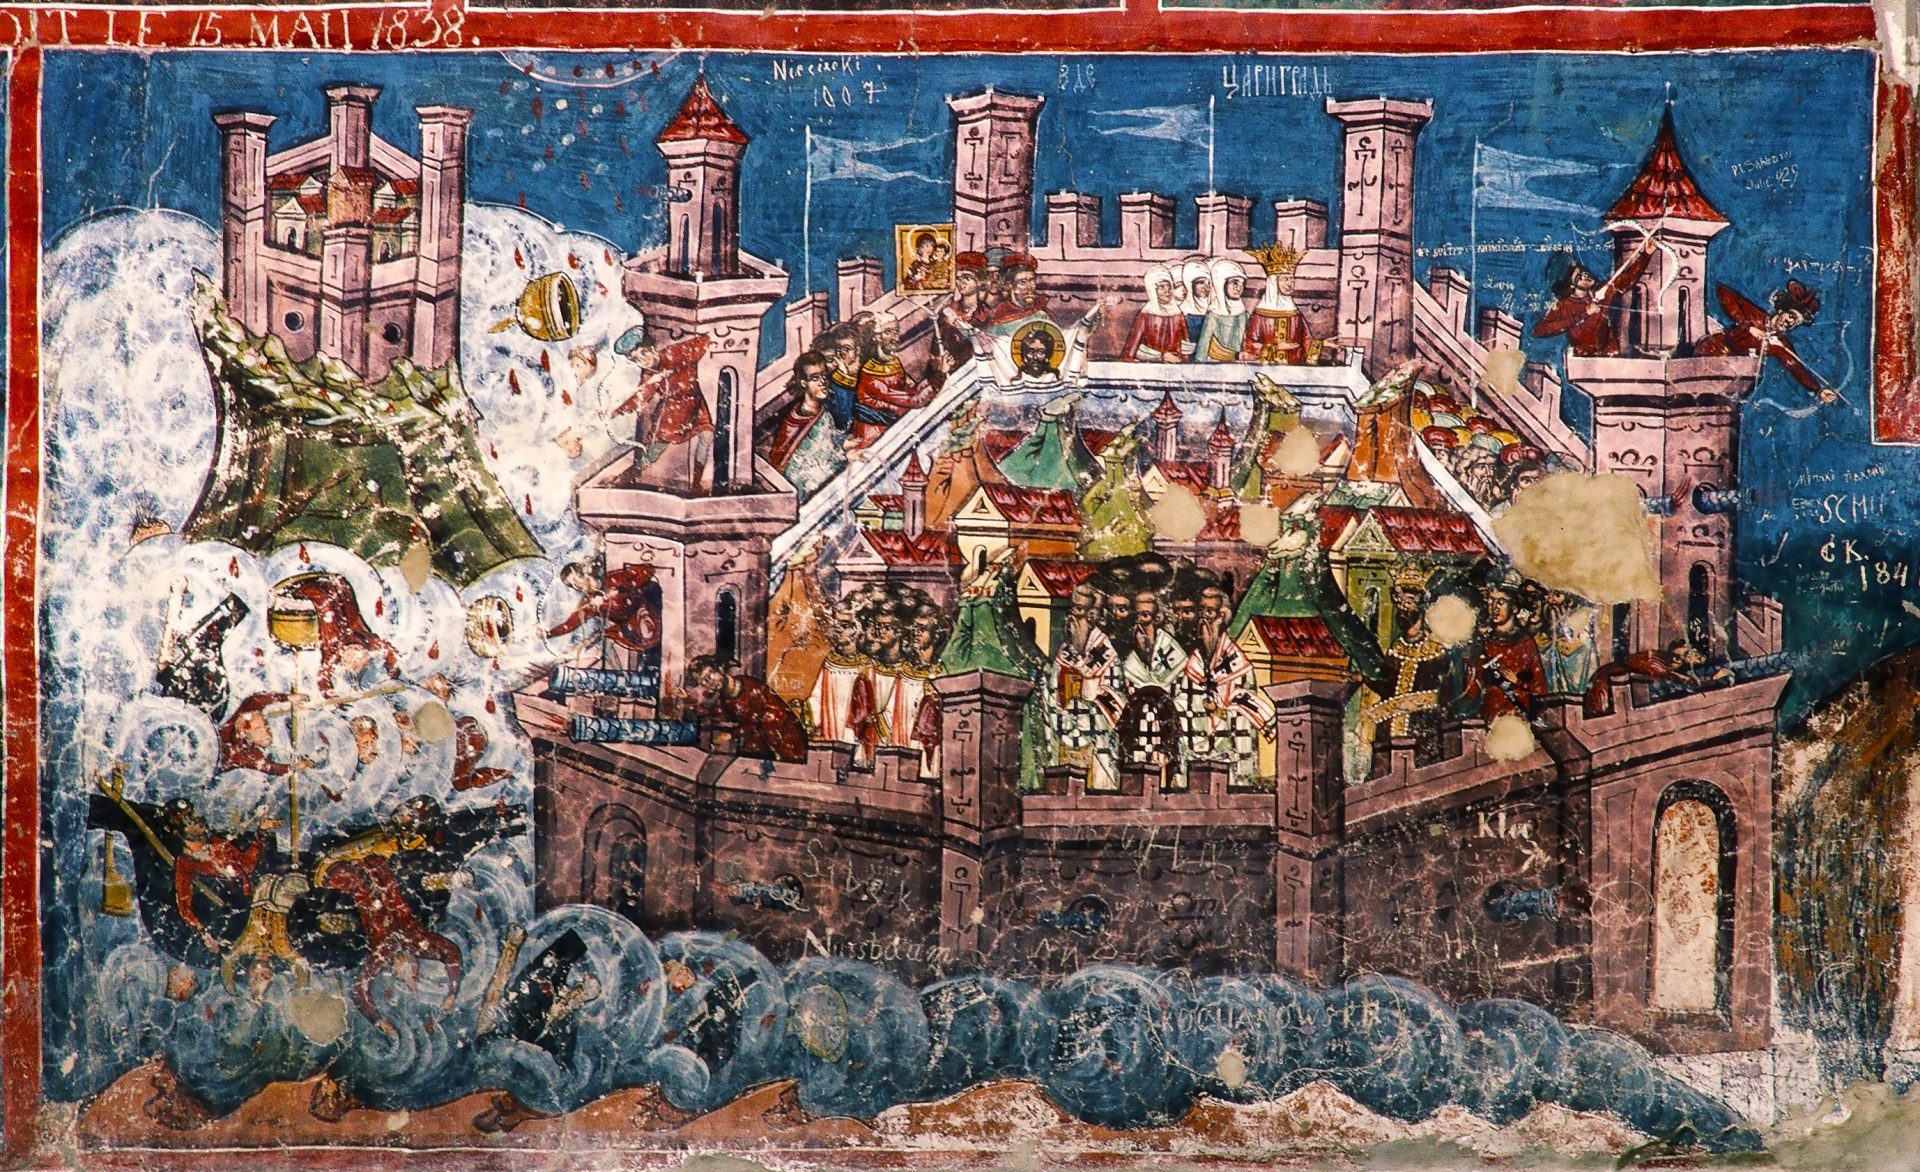 Detail of a fresco depicting the Siege of Constantinople, showcasing vibrant colors with a fortified city surrounded by turbulent waters, numerous soldiers, and flying angels. Historic date inscriptions and Orthodox Christian iconography are interwoven into the artwork, all set against a richly painted backdrop. Located at Moldovița Monastery in Romania